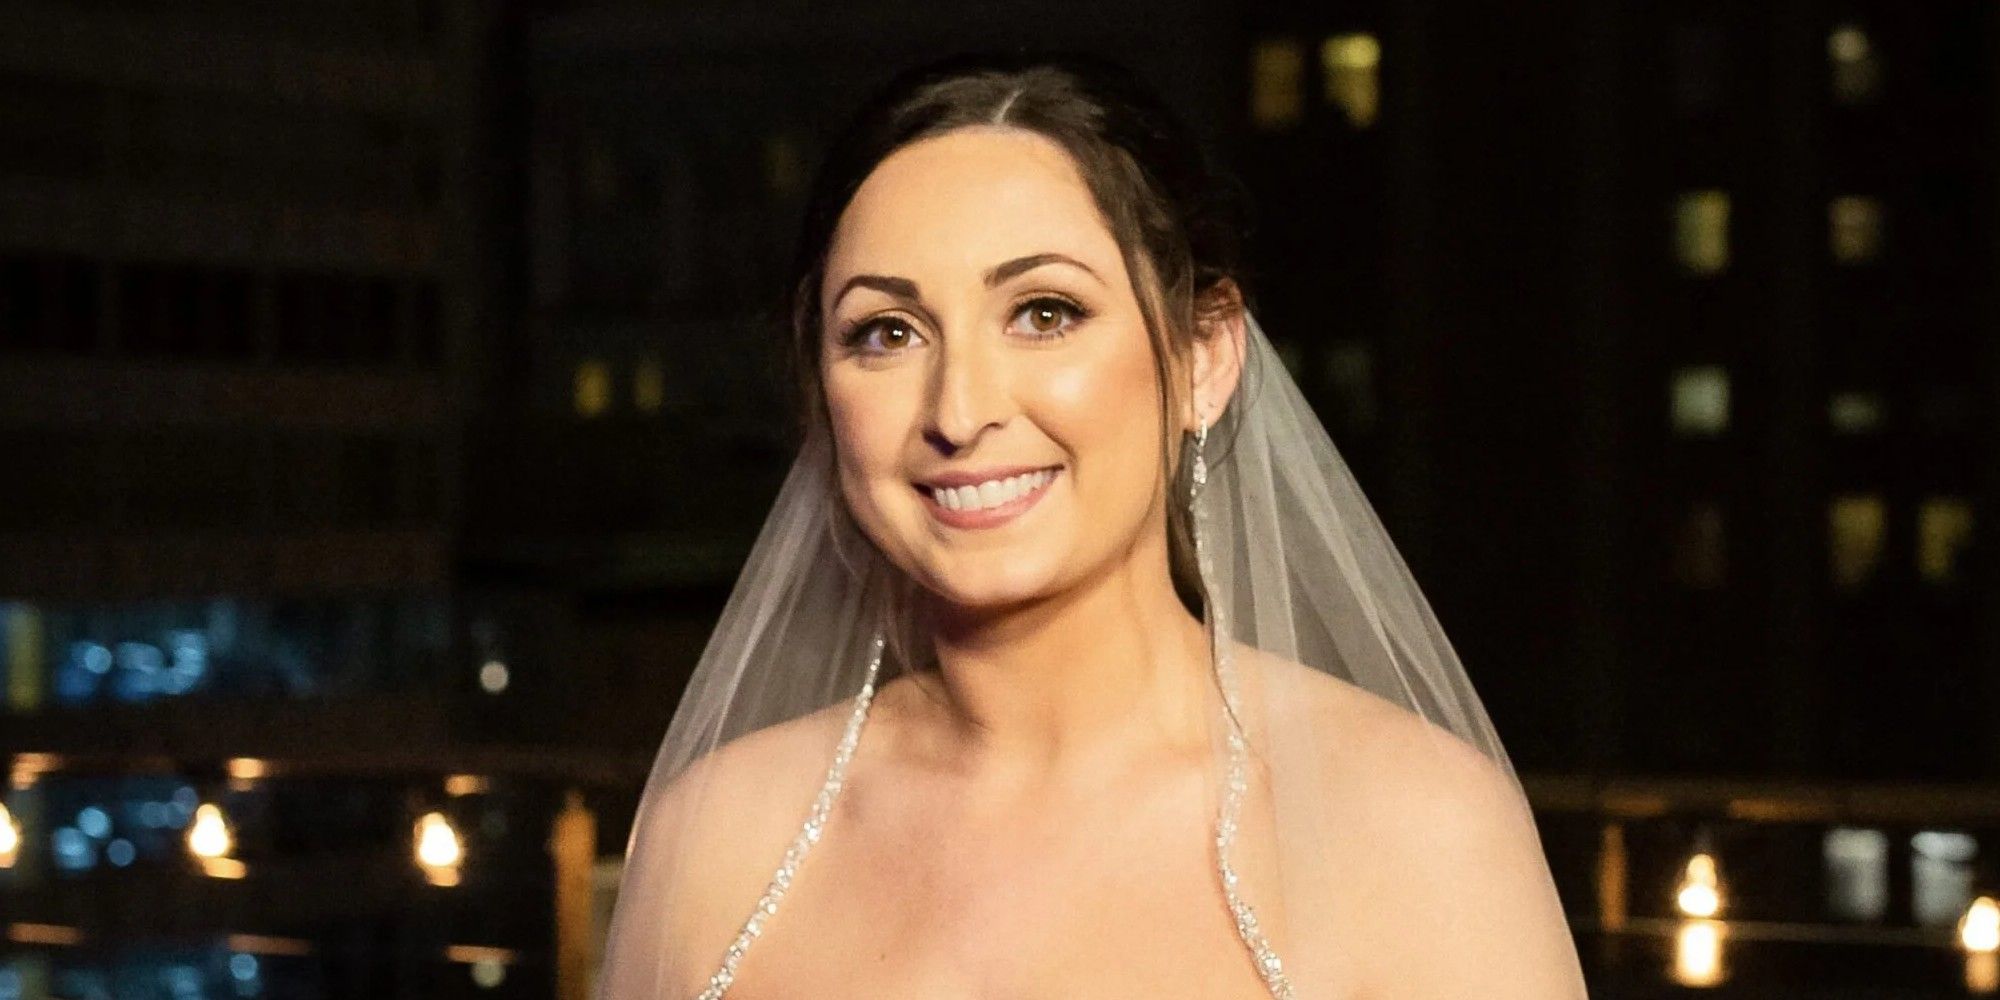 Olivia Cornu from Married At First Sight smiling during her wedding day.